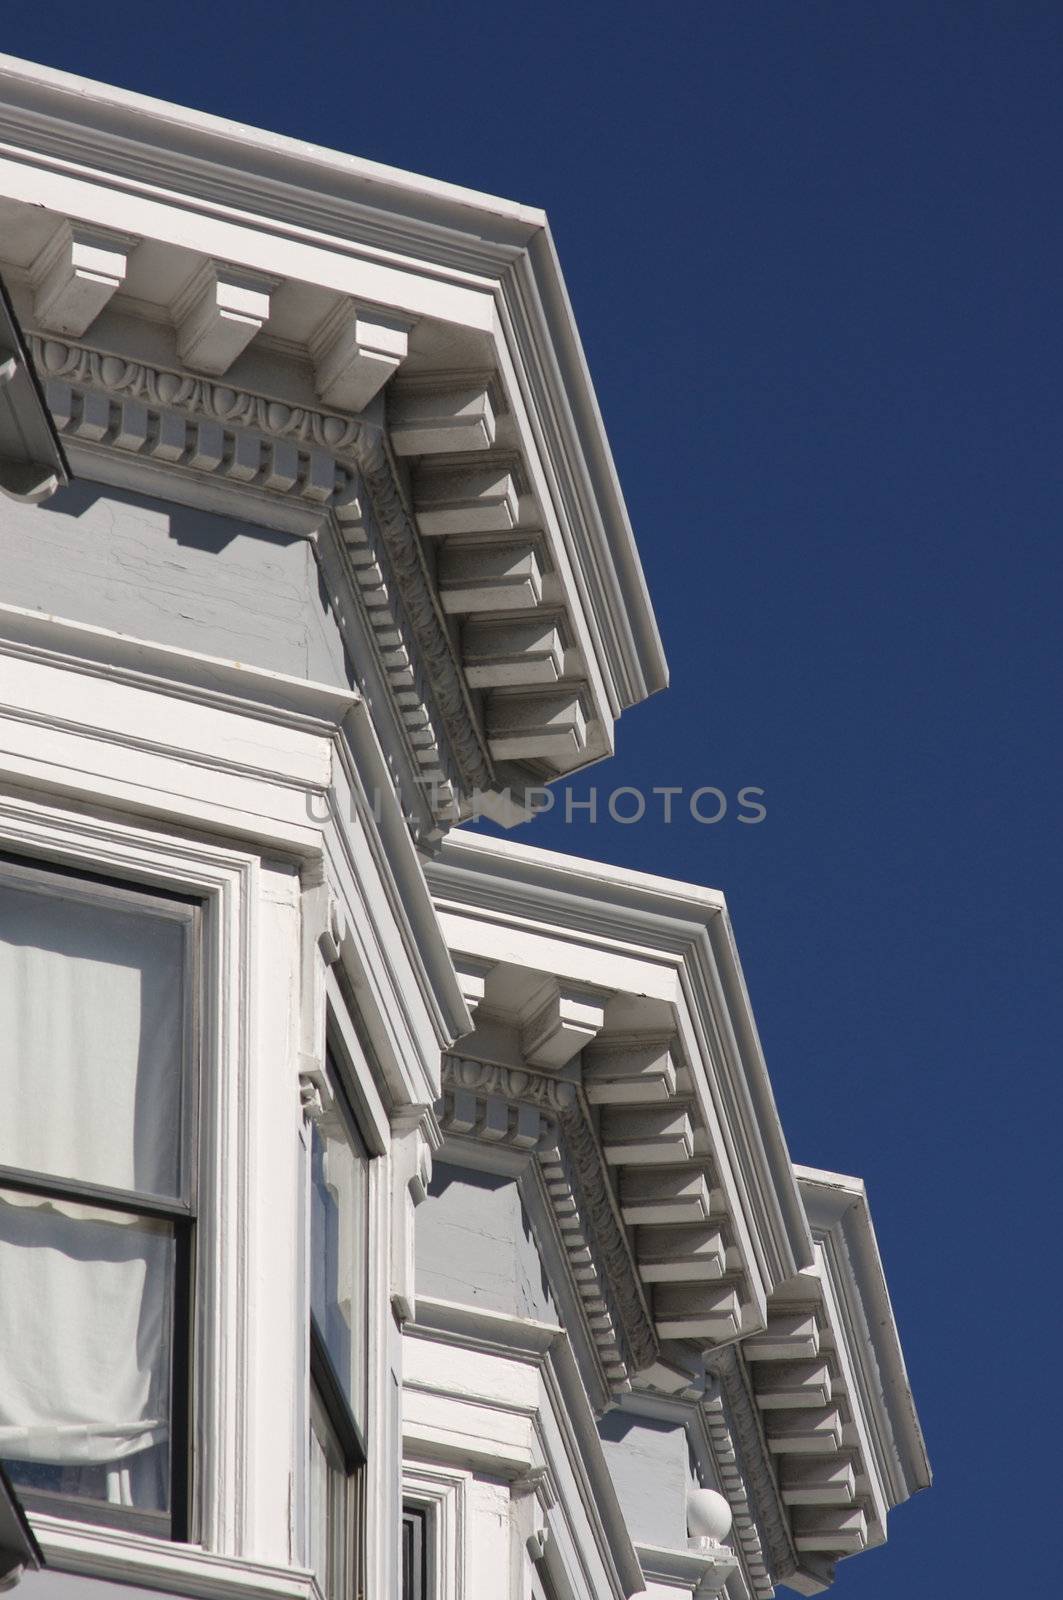 Victorian Home Details in San Francisco